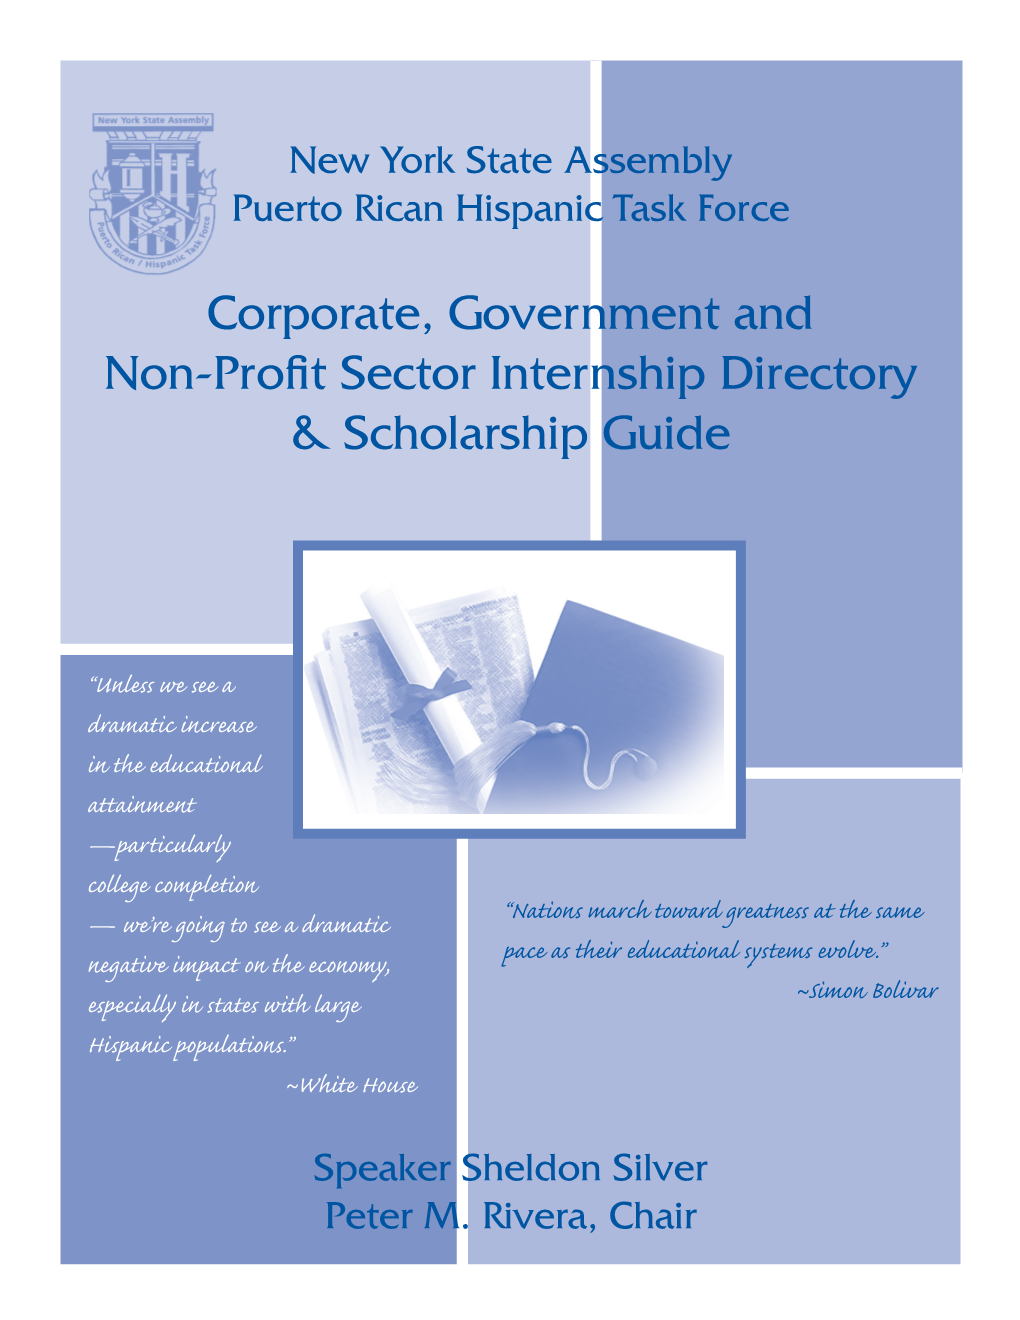 Corporate, Government and Non-Profit Sector Internship Directory & Scholarship Guide